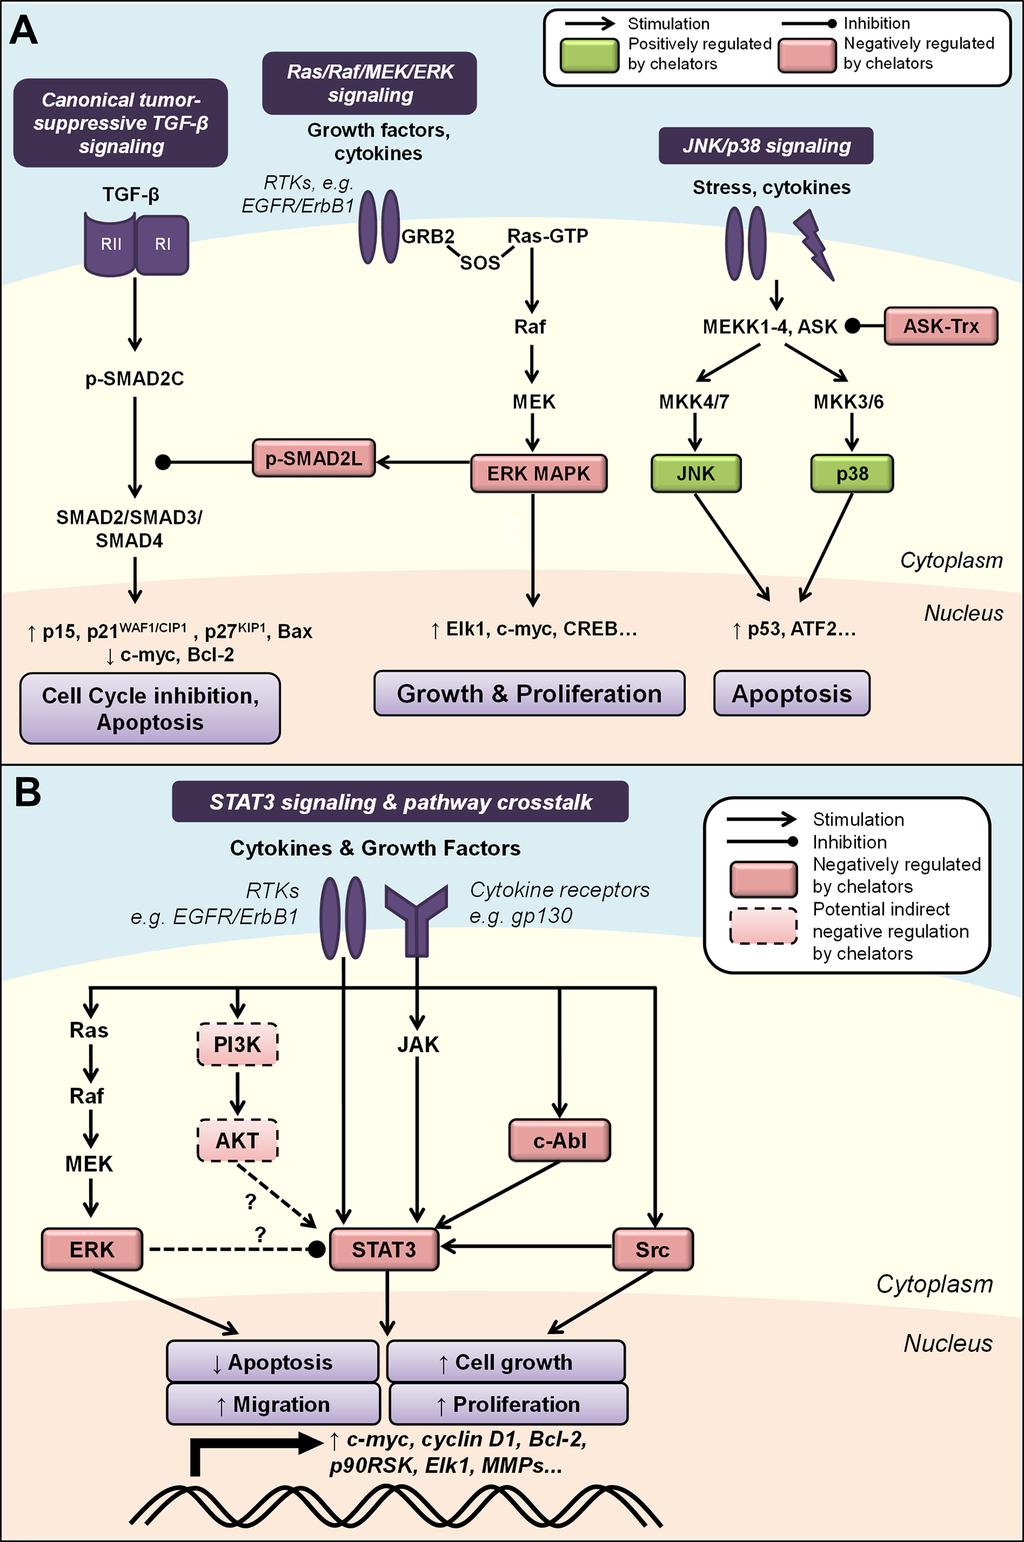 Figure 4: A. Iron chelation modulates mitogen-activated protein kinase (MAPK) signaling.